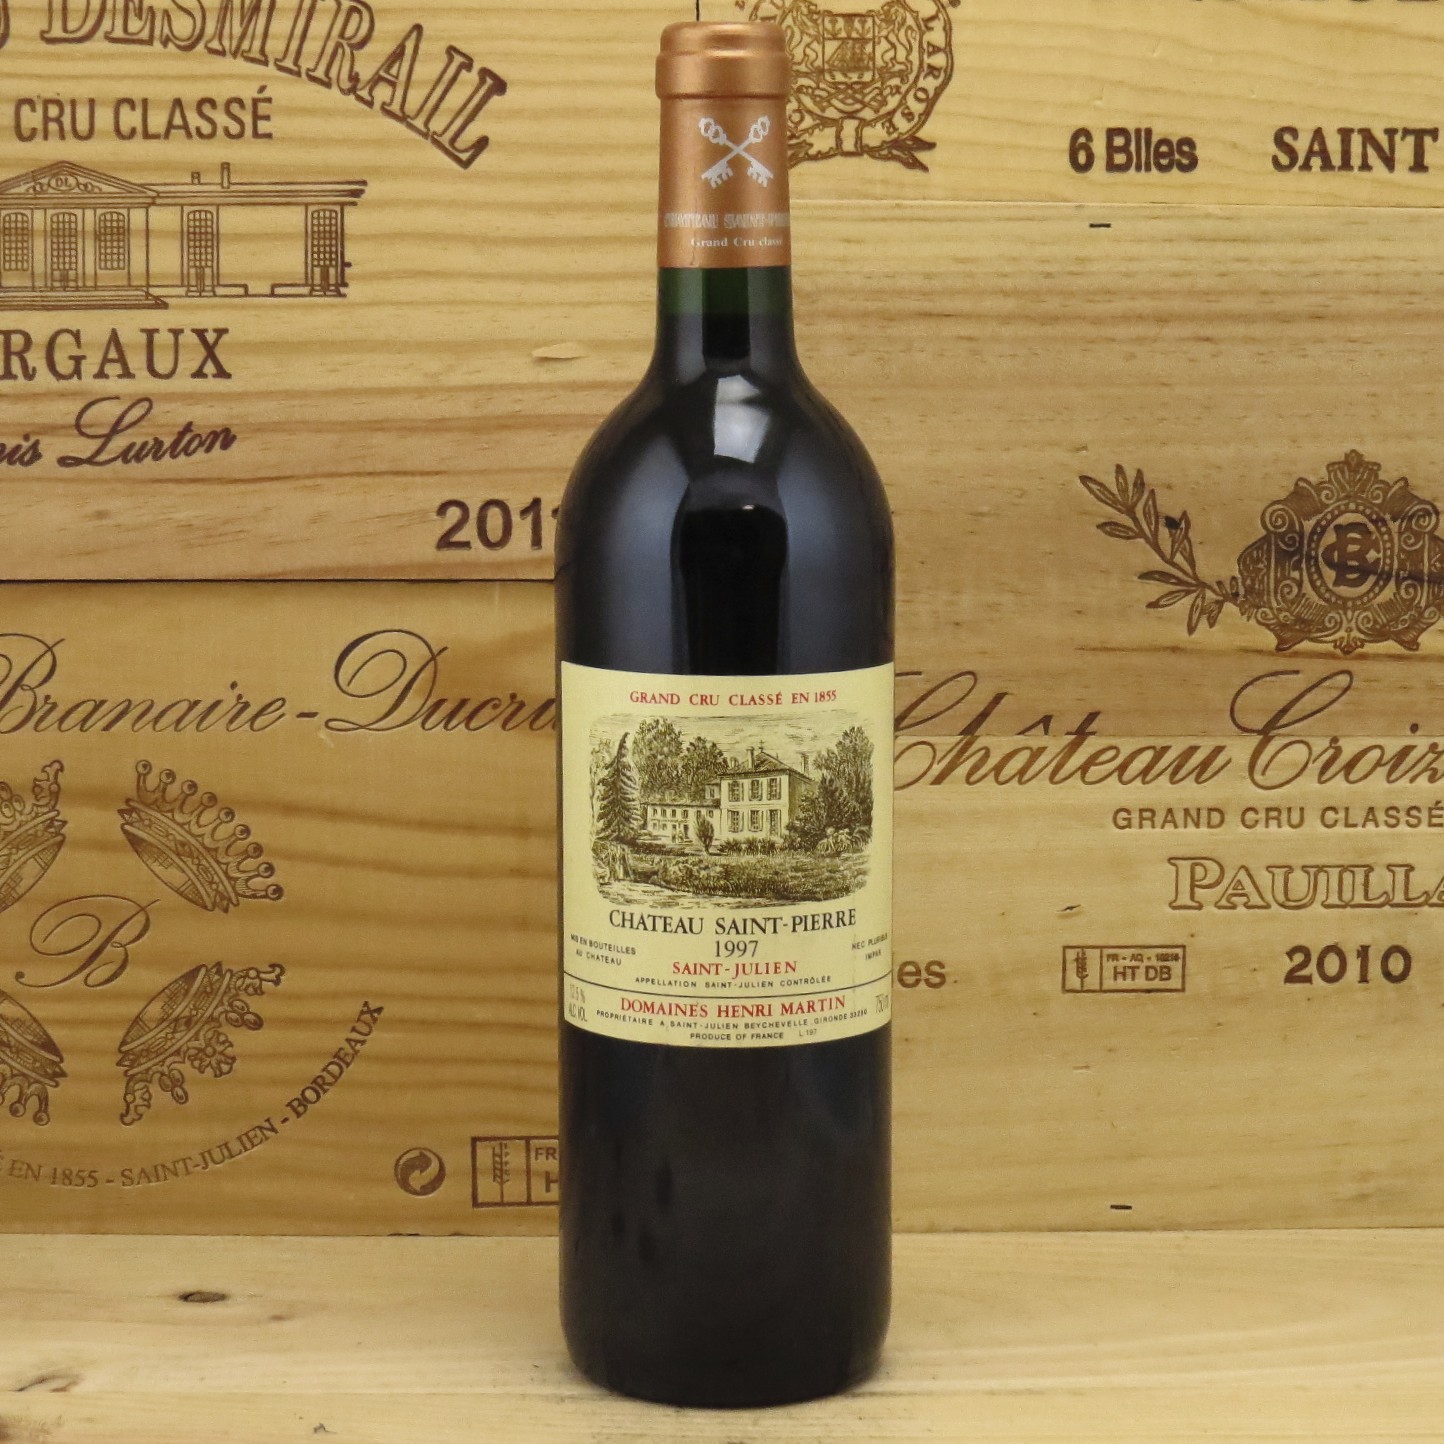 1997 Chateau St.Pierre Beychevelle